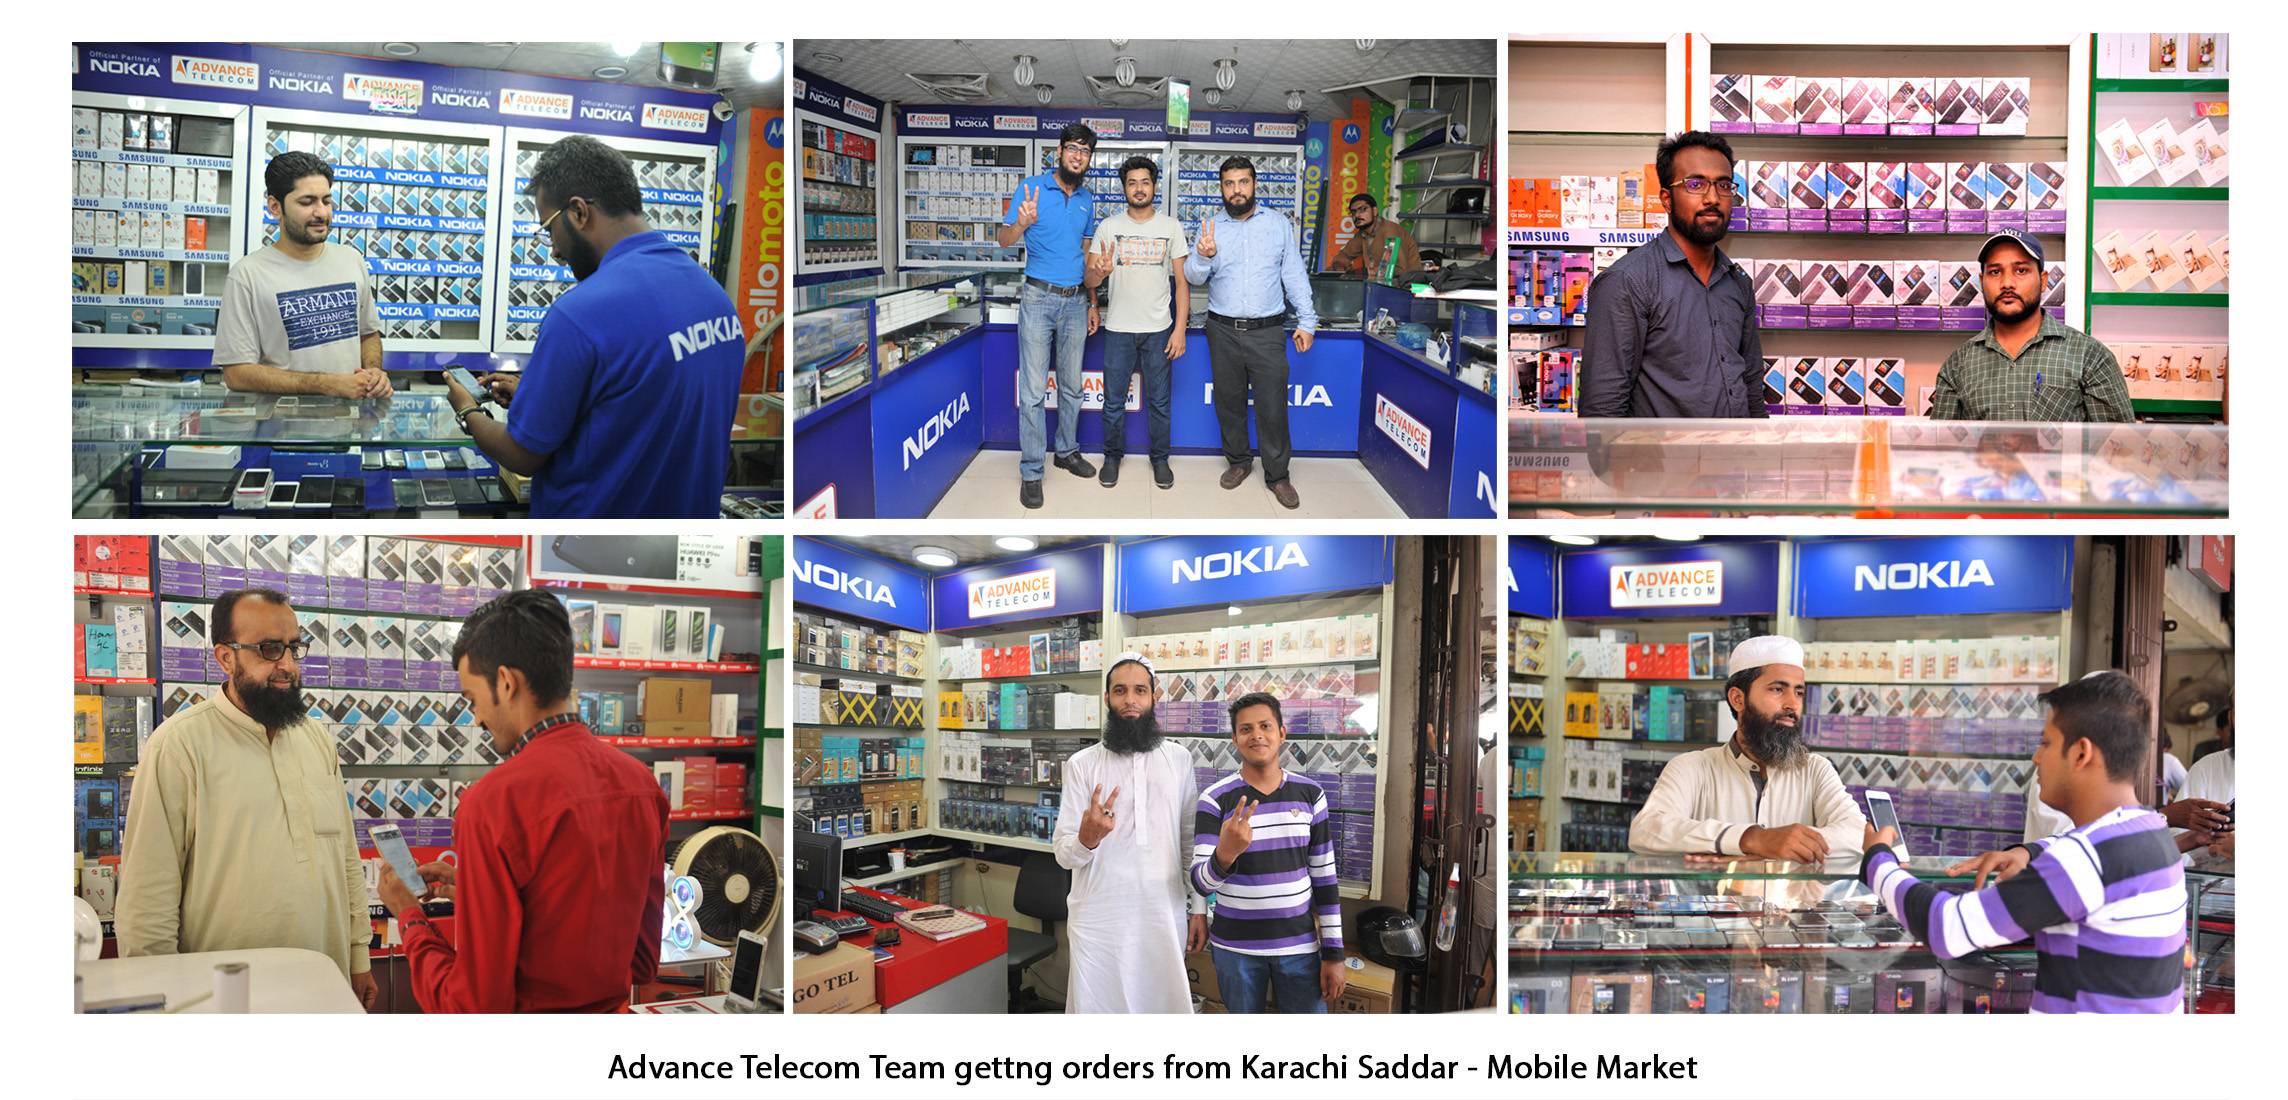 With an overwhelming response to Nokia phones, Advance Telecom hopes to up market share